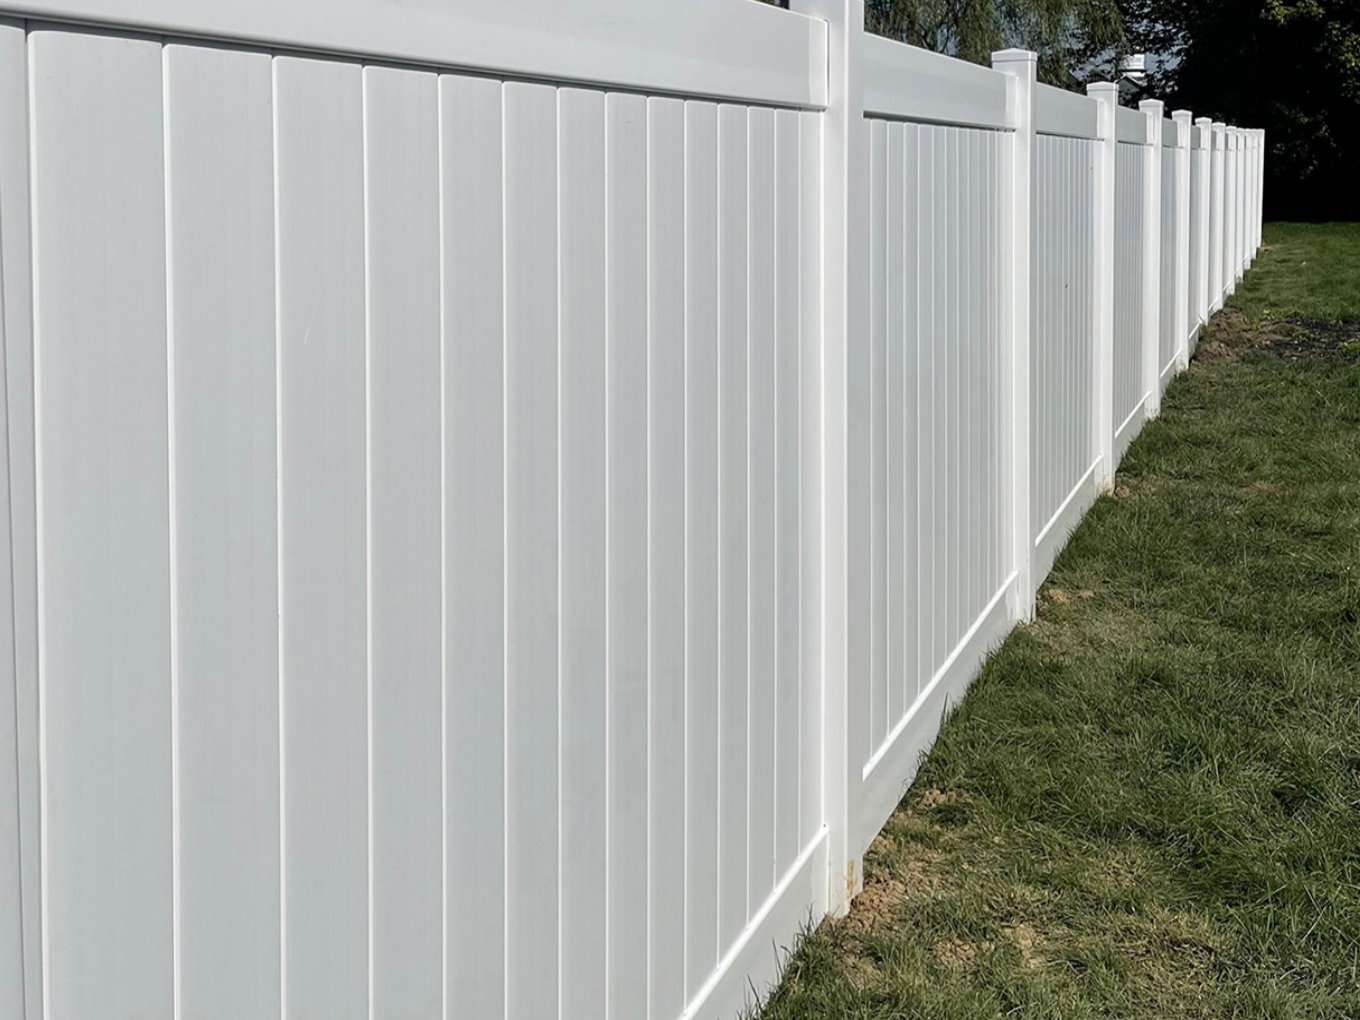 Plainfield Indiana vinyl privacy fencing